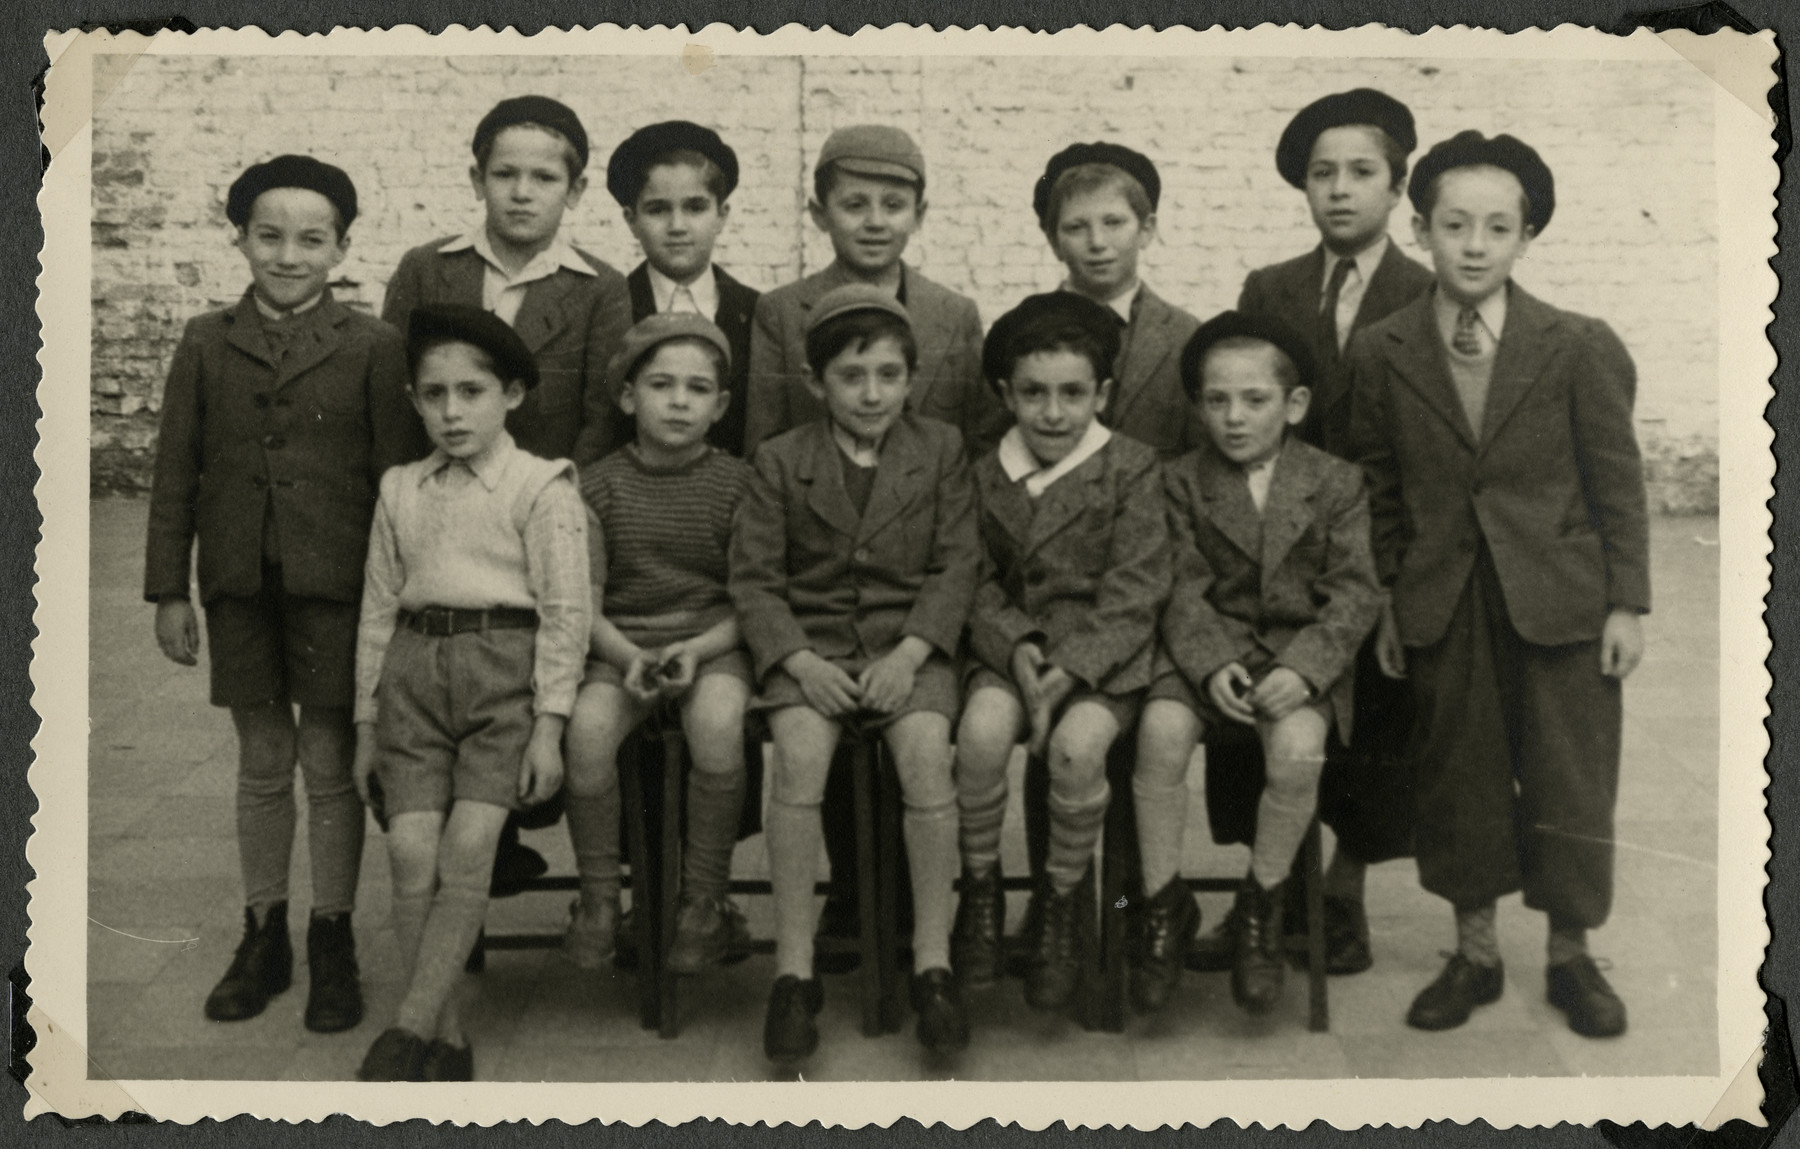 Group portrait of younger boys in the postwar Tiefenbrunner children's home in Antwerp.

Andre Sharp is standing on the far right.